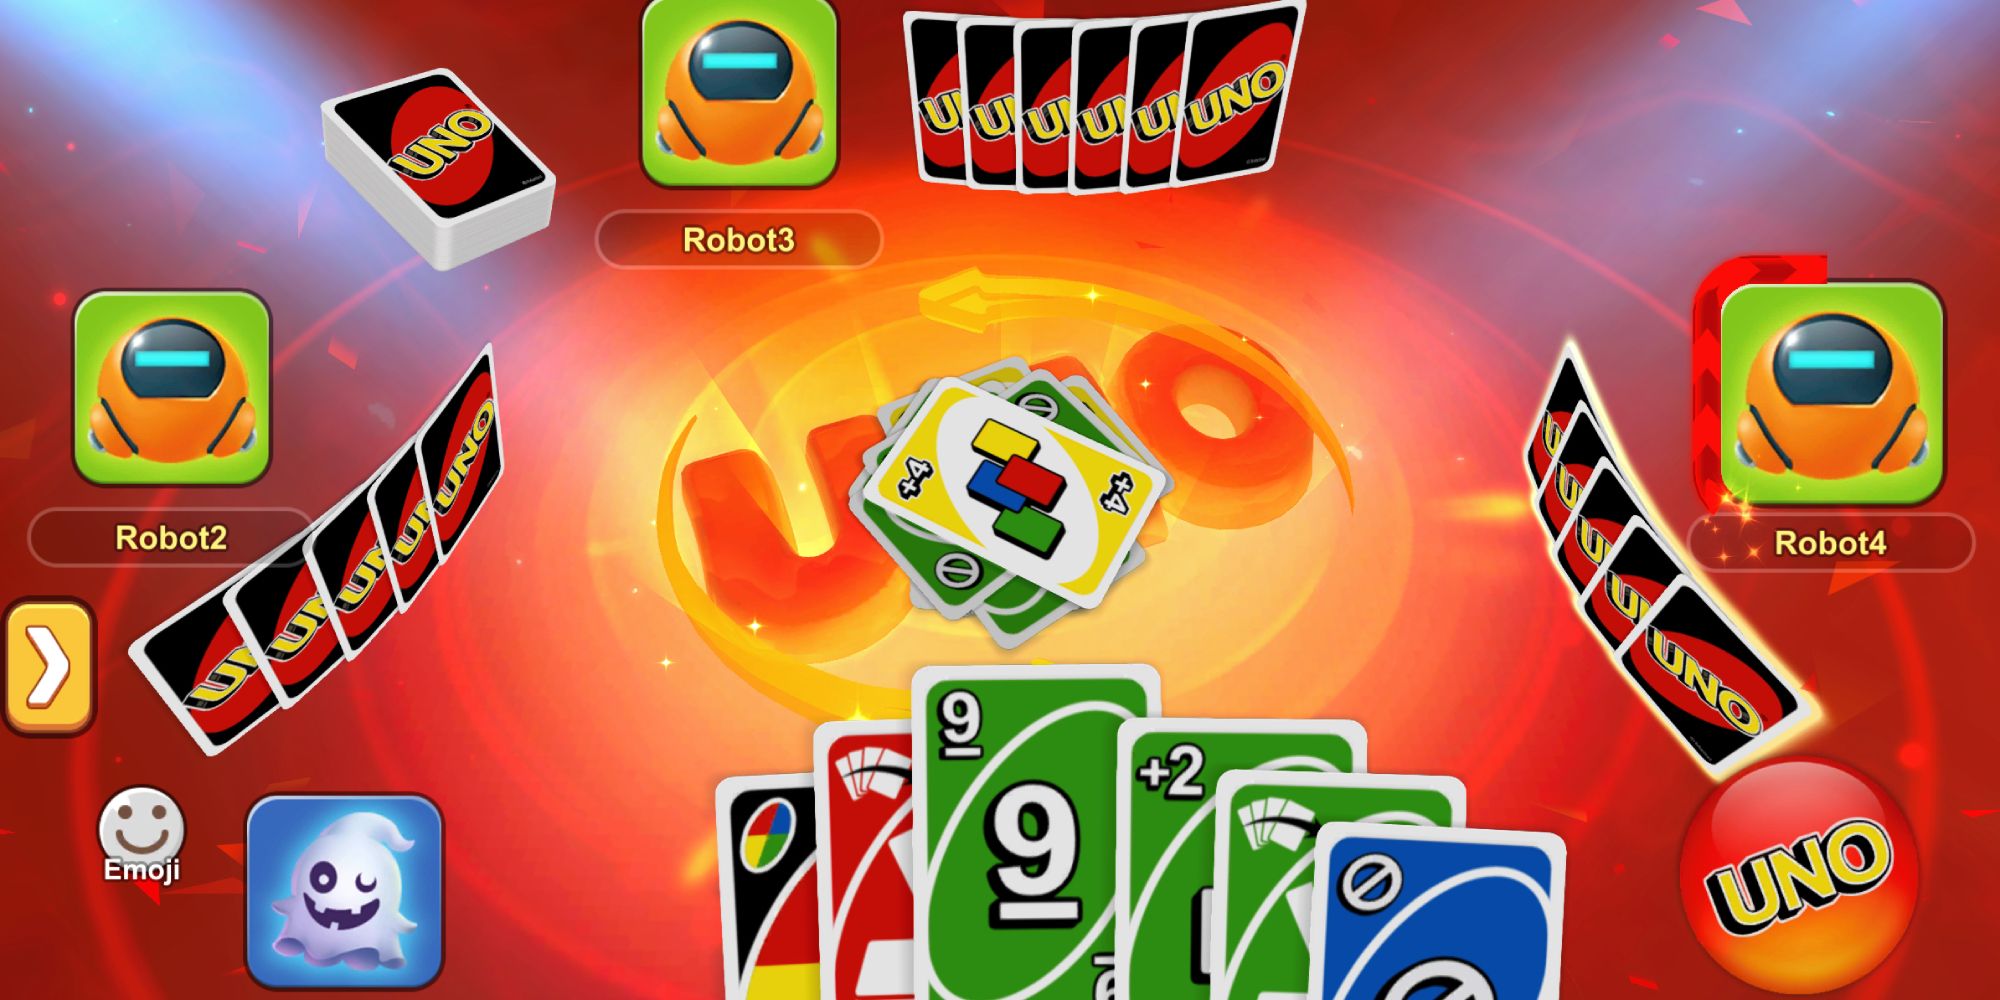 UNO 4 player card game (player 4's turn)